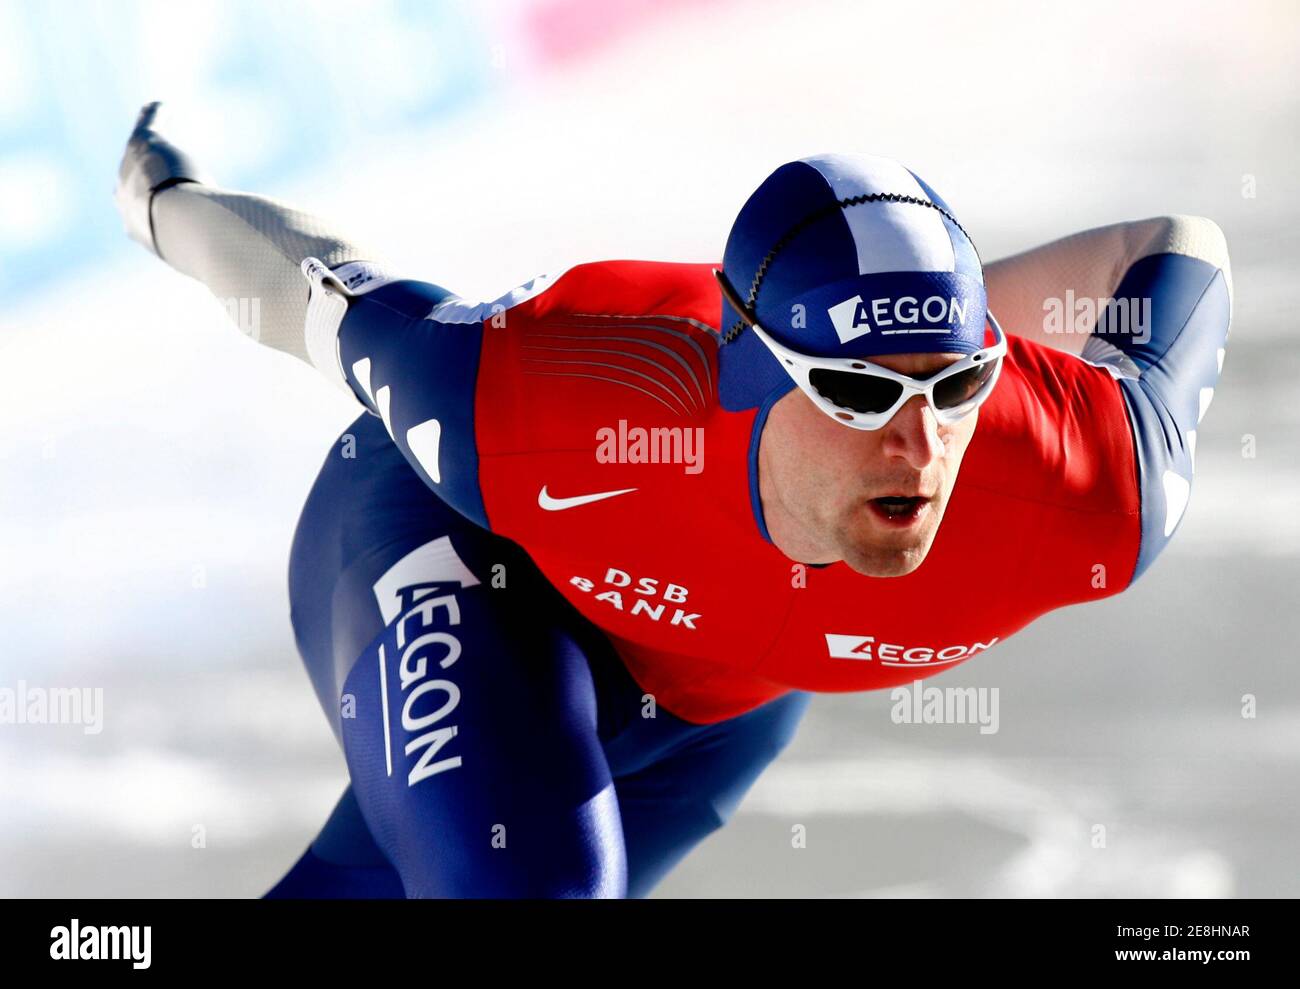 Netherlands' Mark Tuitert skates during the 500 metres European Speed Skating Championships race at the outdoor Ritten Arena in Collalbo, Italy, January 12, 2007.       REUTERS/Jerry Lampen (ITALY) Stock Photo